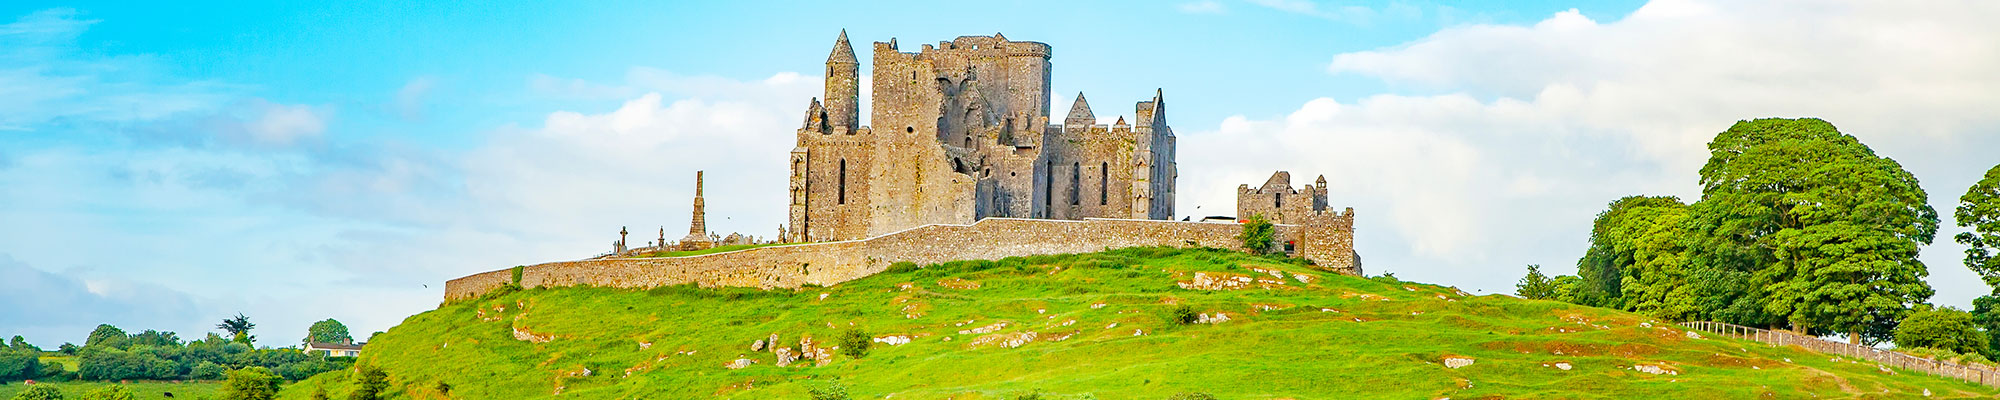 Peaceful Irish landscape view, Rock of Cashel ruined castle on background in Tipperary county